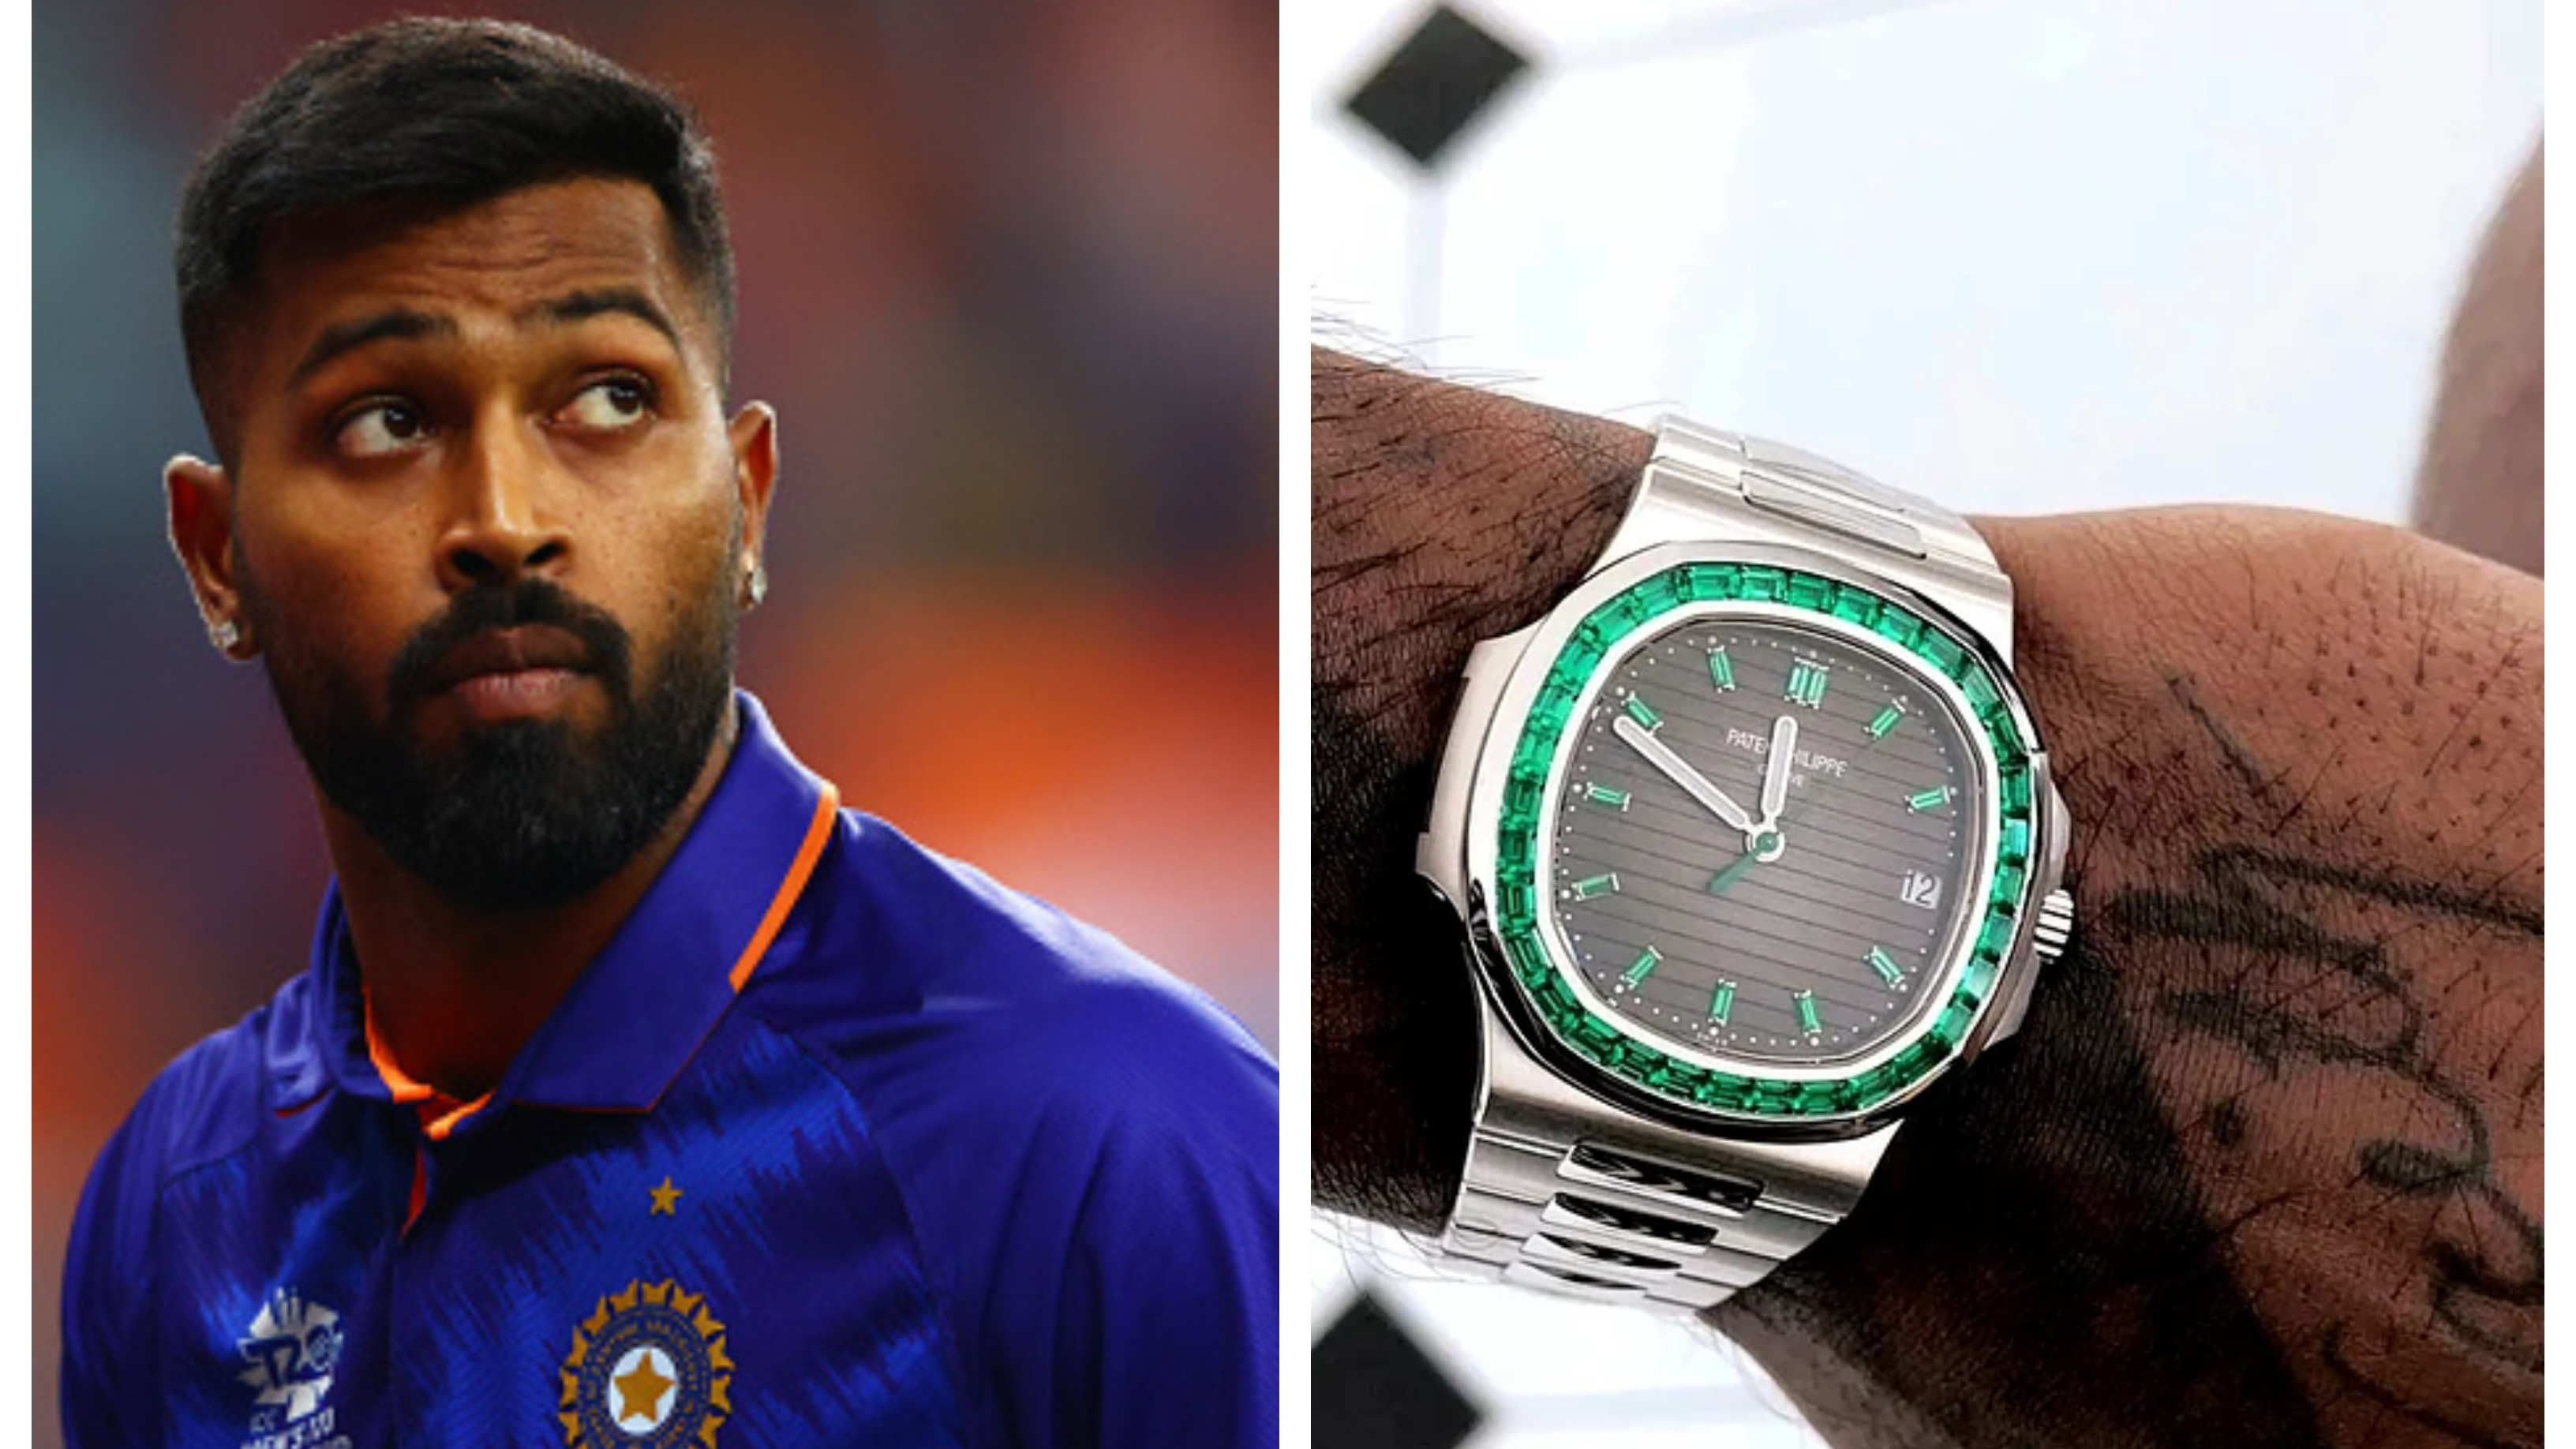 Hardik Pandya denies charges of luxury watches worth Rs 5 crore seized from him at Mumbai airport